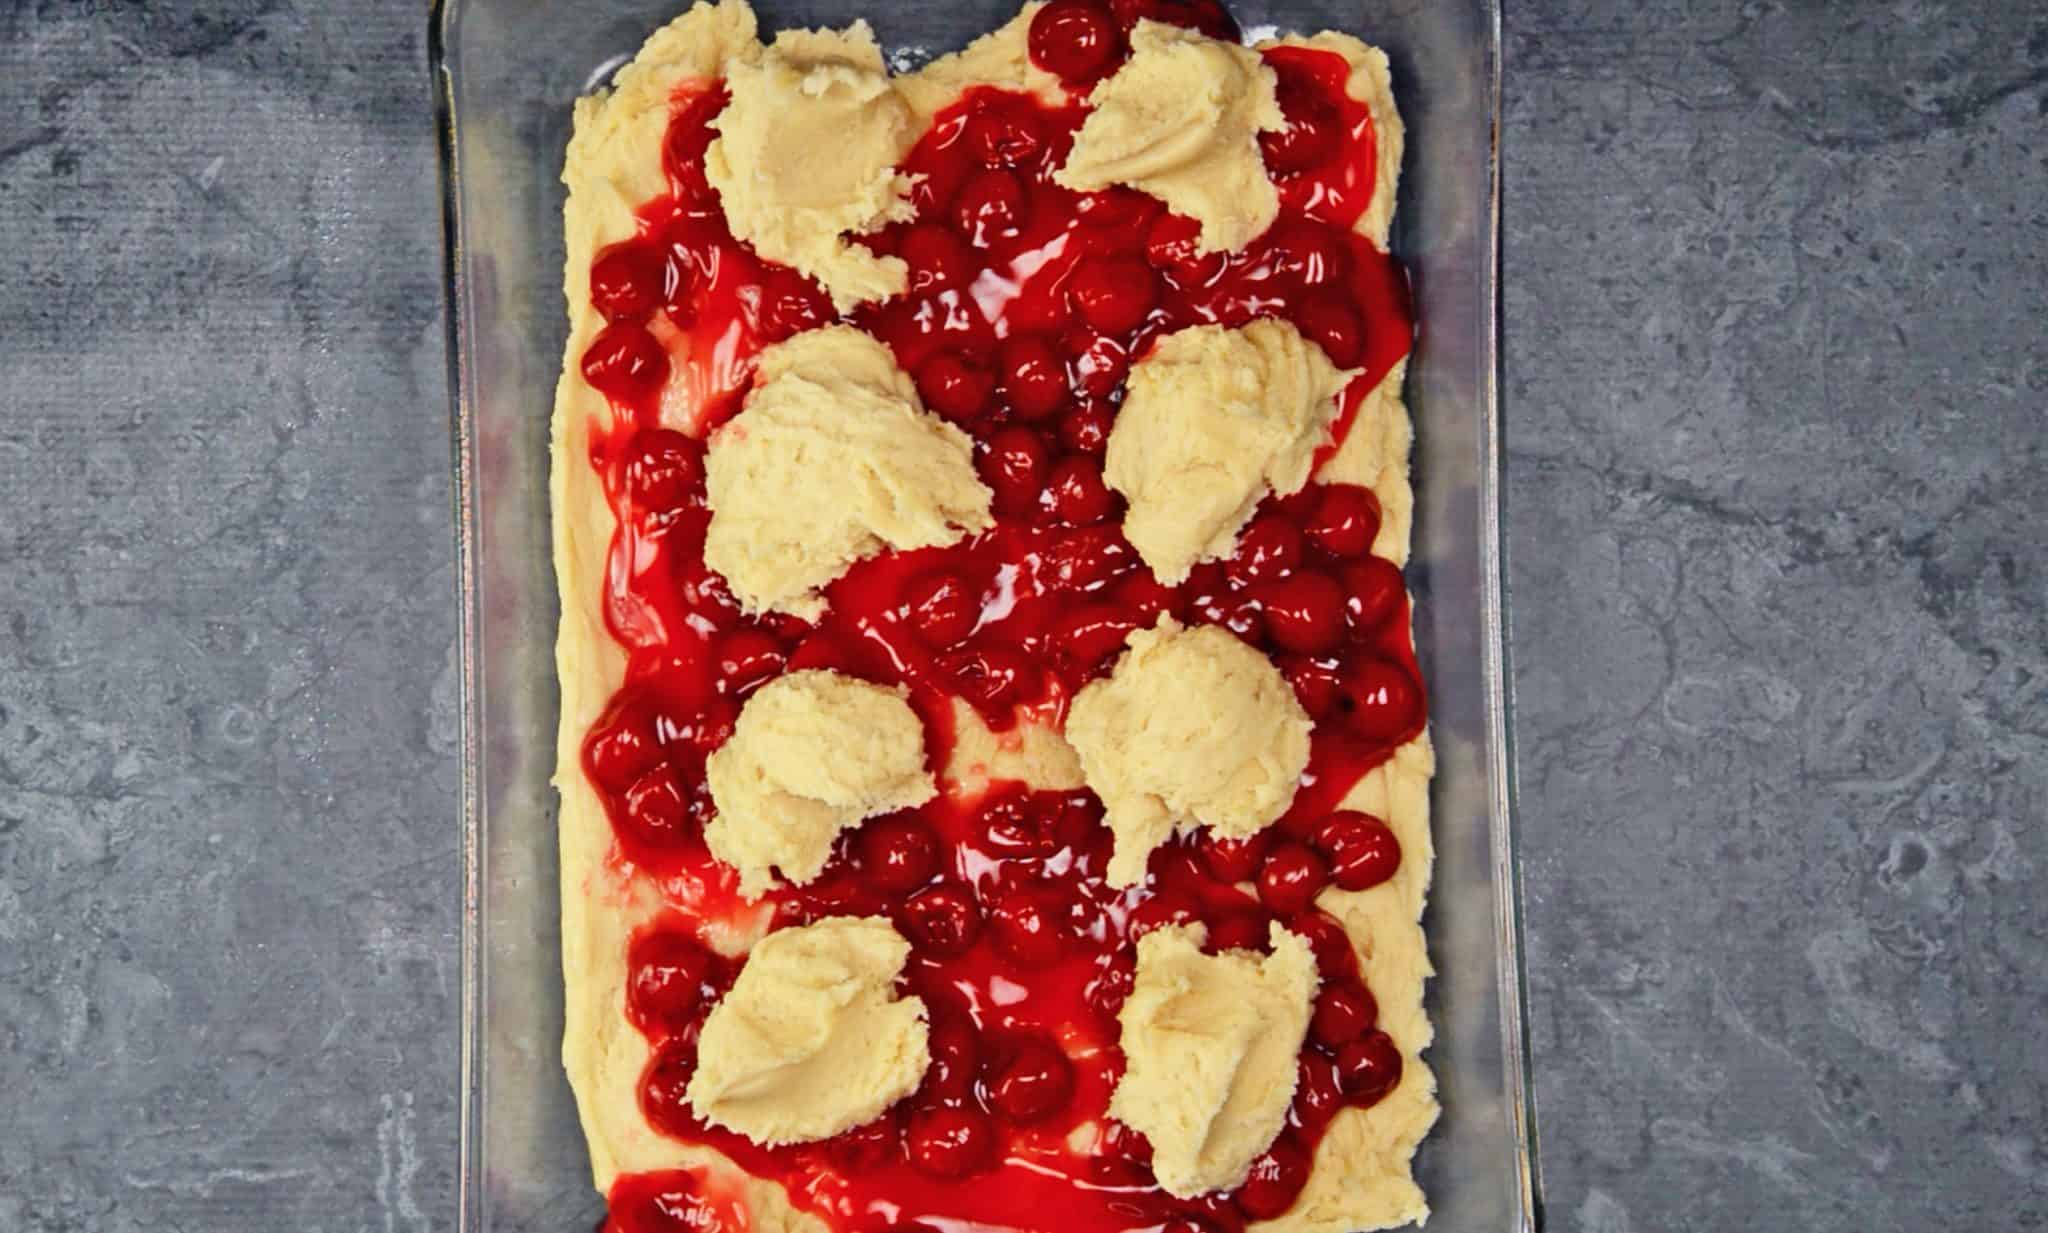 Cherry Pie Bars are the best mix of cherry pie, bars and hand pies. Easy to make and easy to eat, they are the ultimate easy dessert recipe!  #cherrypiebars www.savoryexperiments.com 